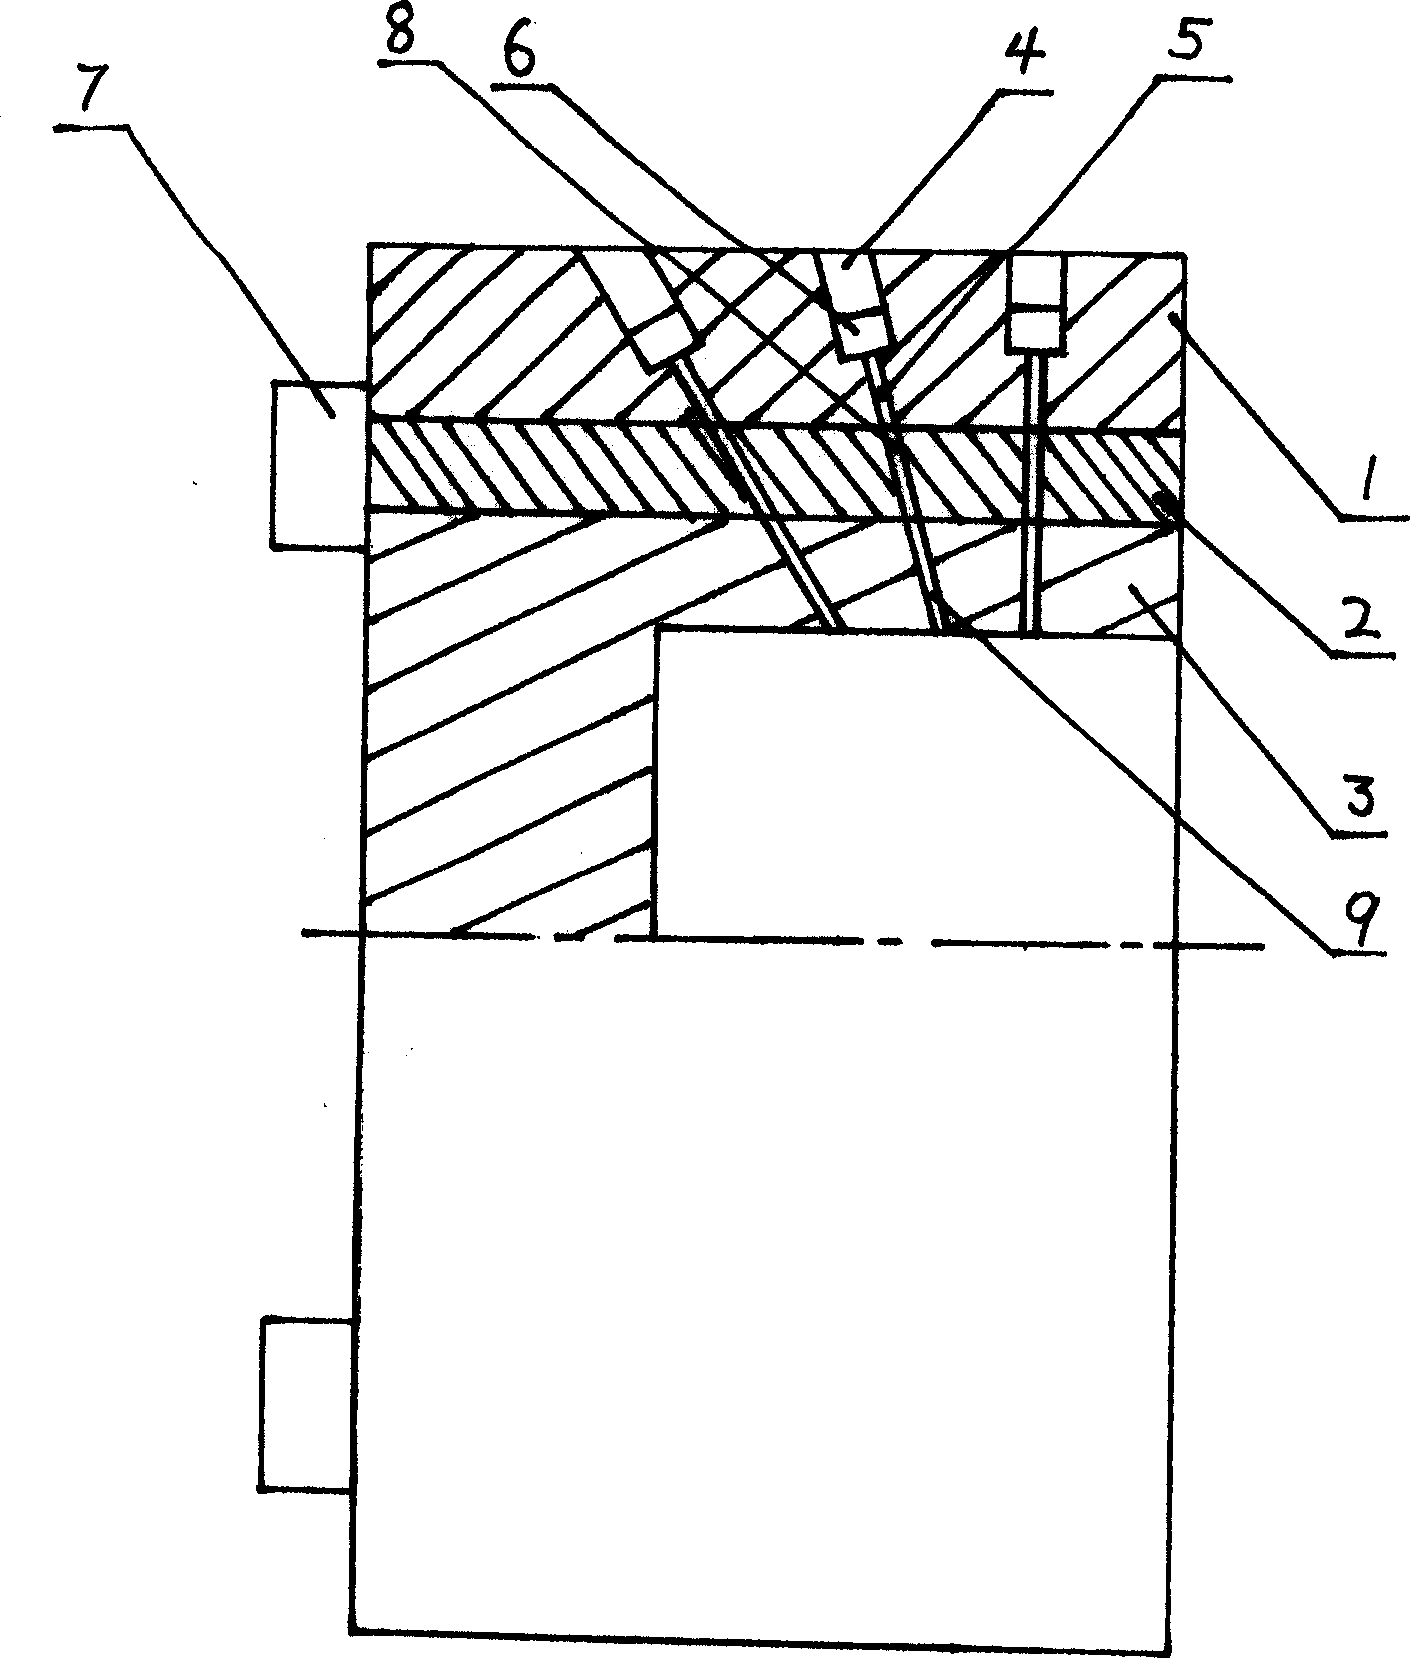 A medical radiation therapy apparatus structure